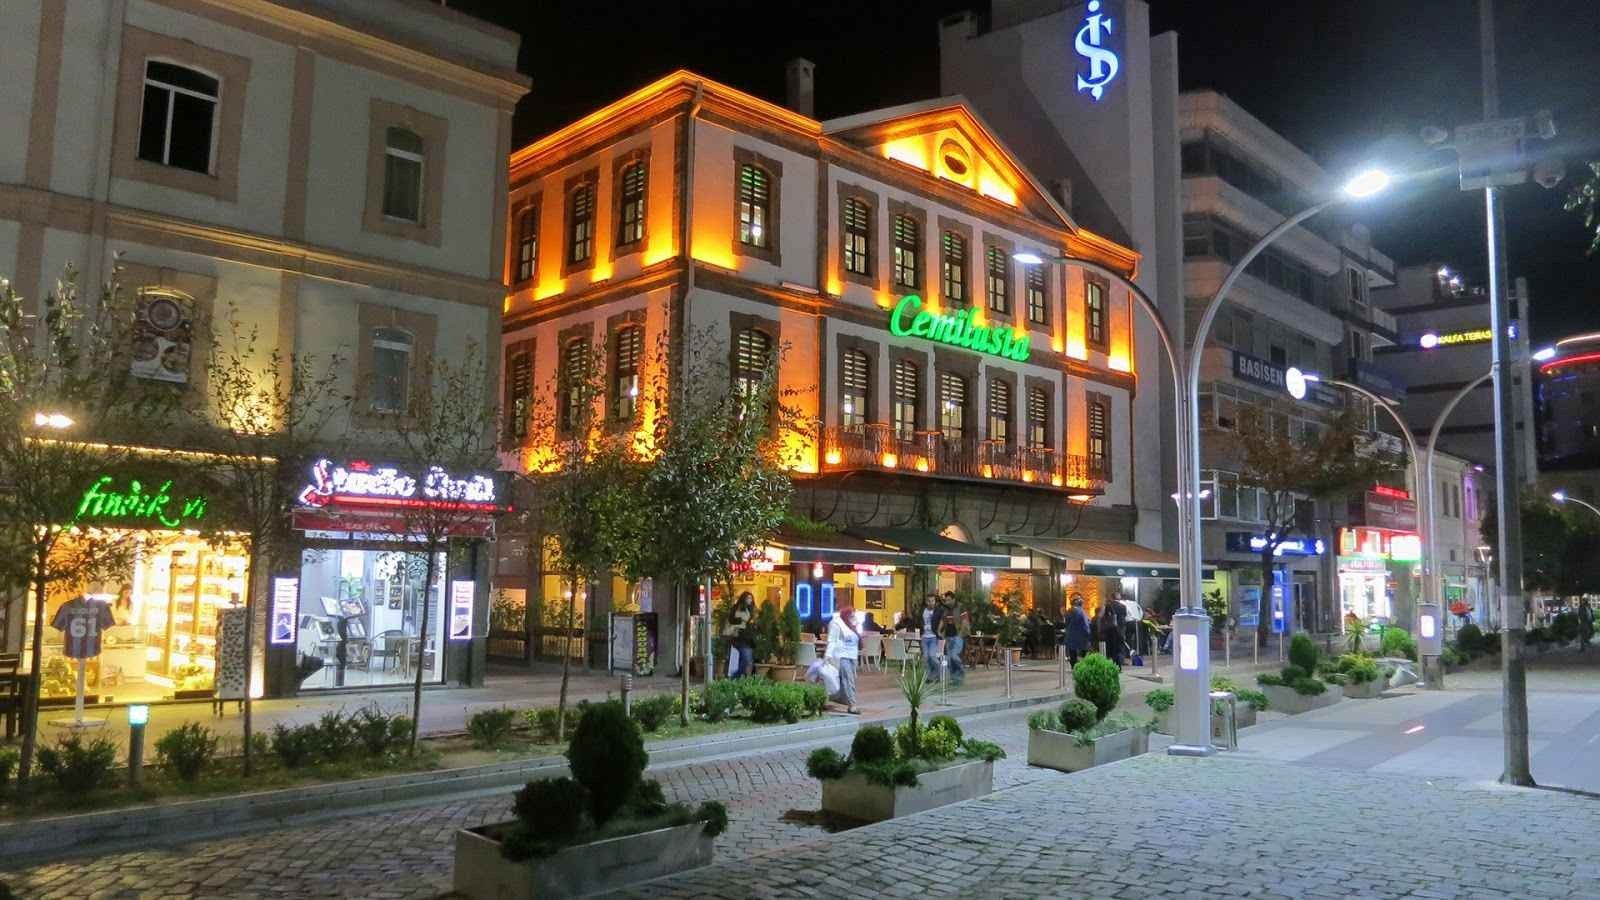 1581206119 109 The best restaurants in Trabzon .. a list of the - The best restaurants in Trabzon .. a list of the finest restaurants where you can taste the most delicious and delicious dishes